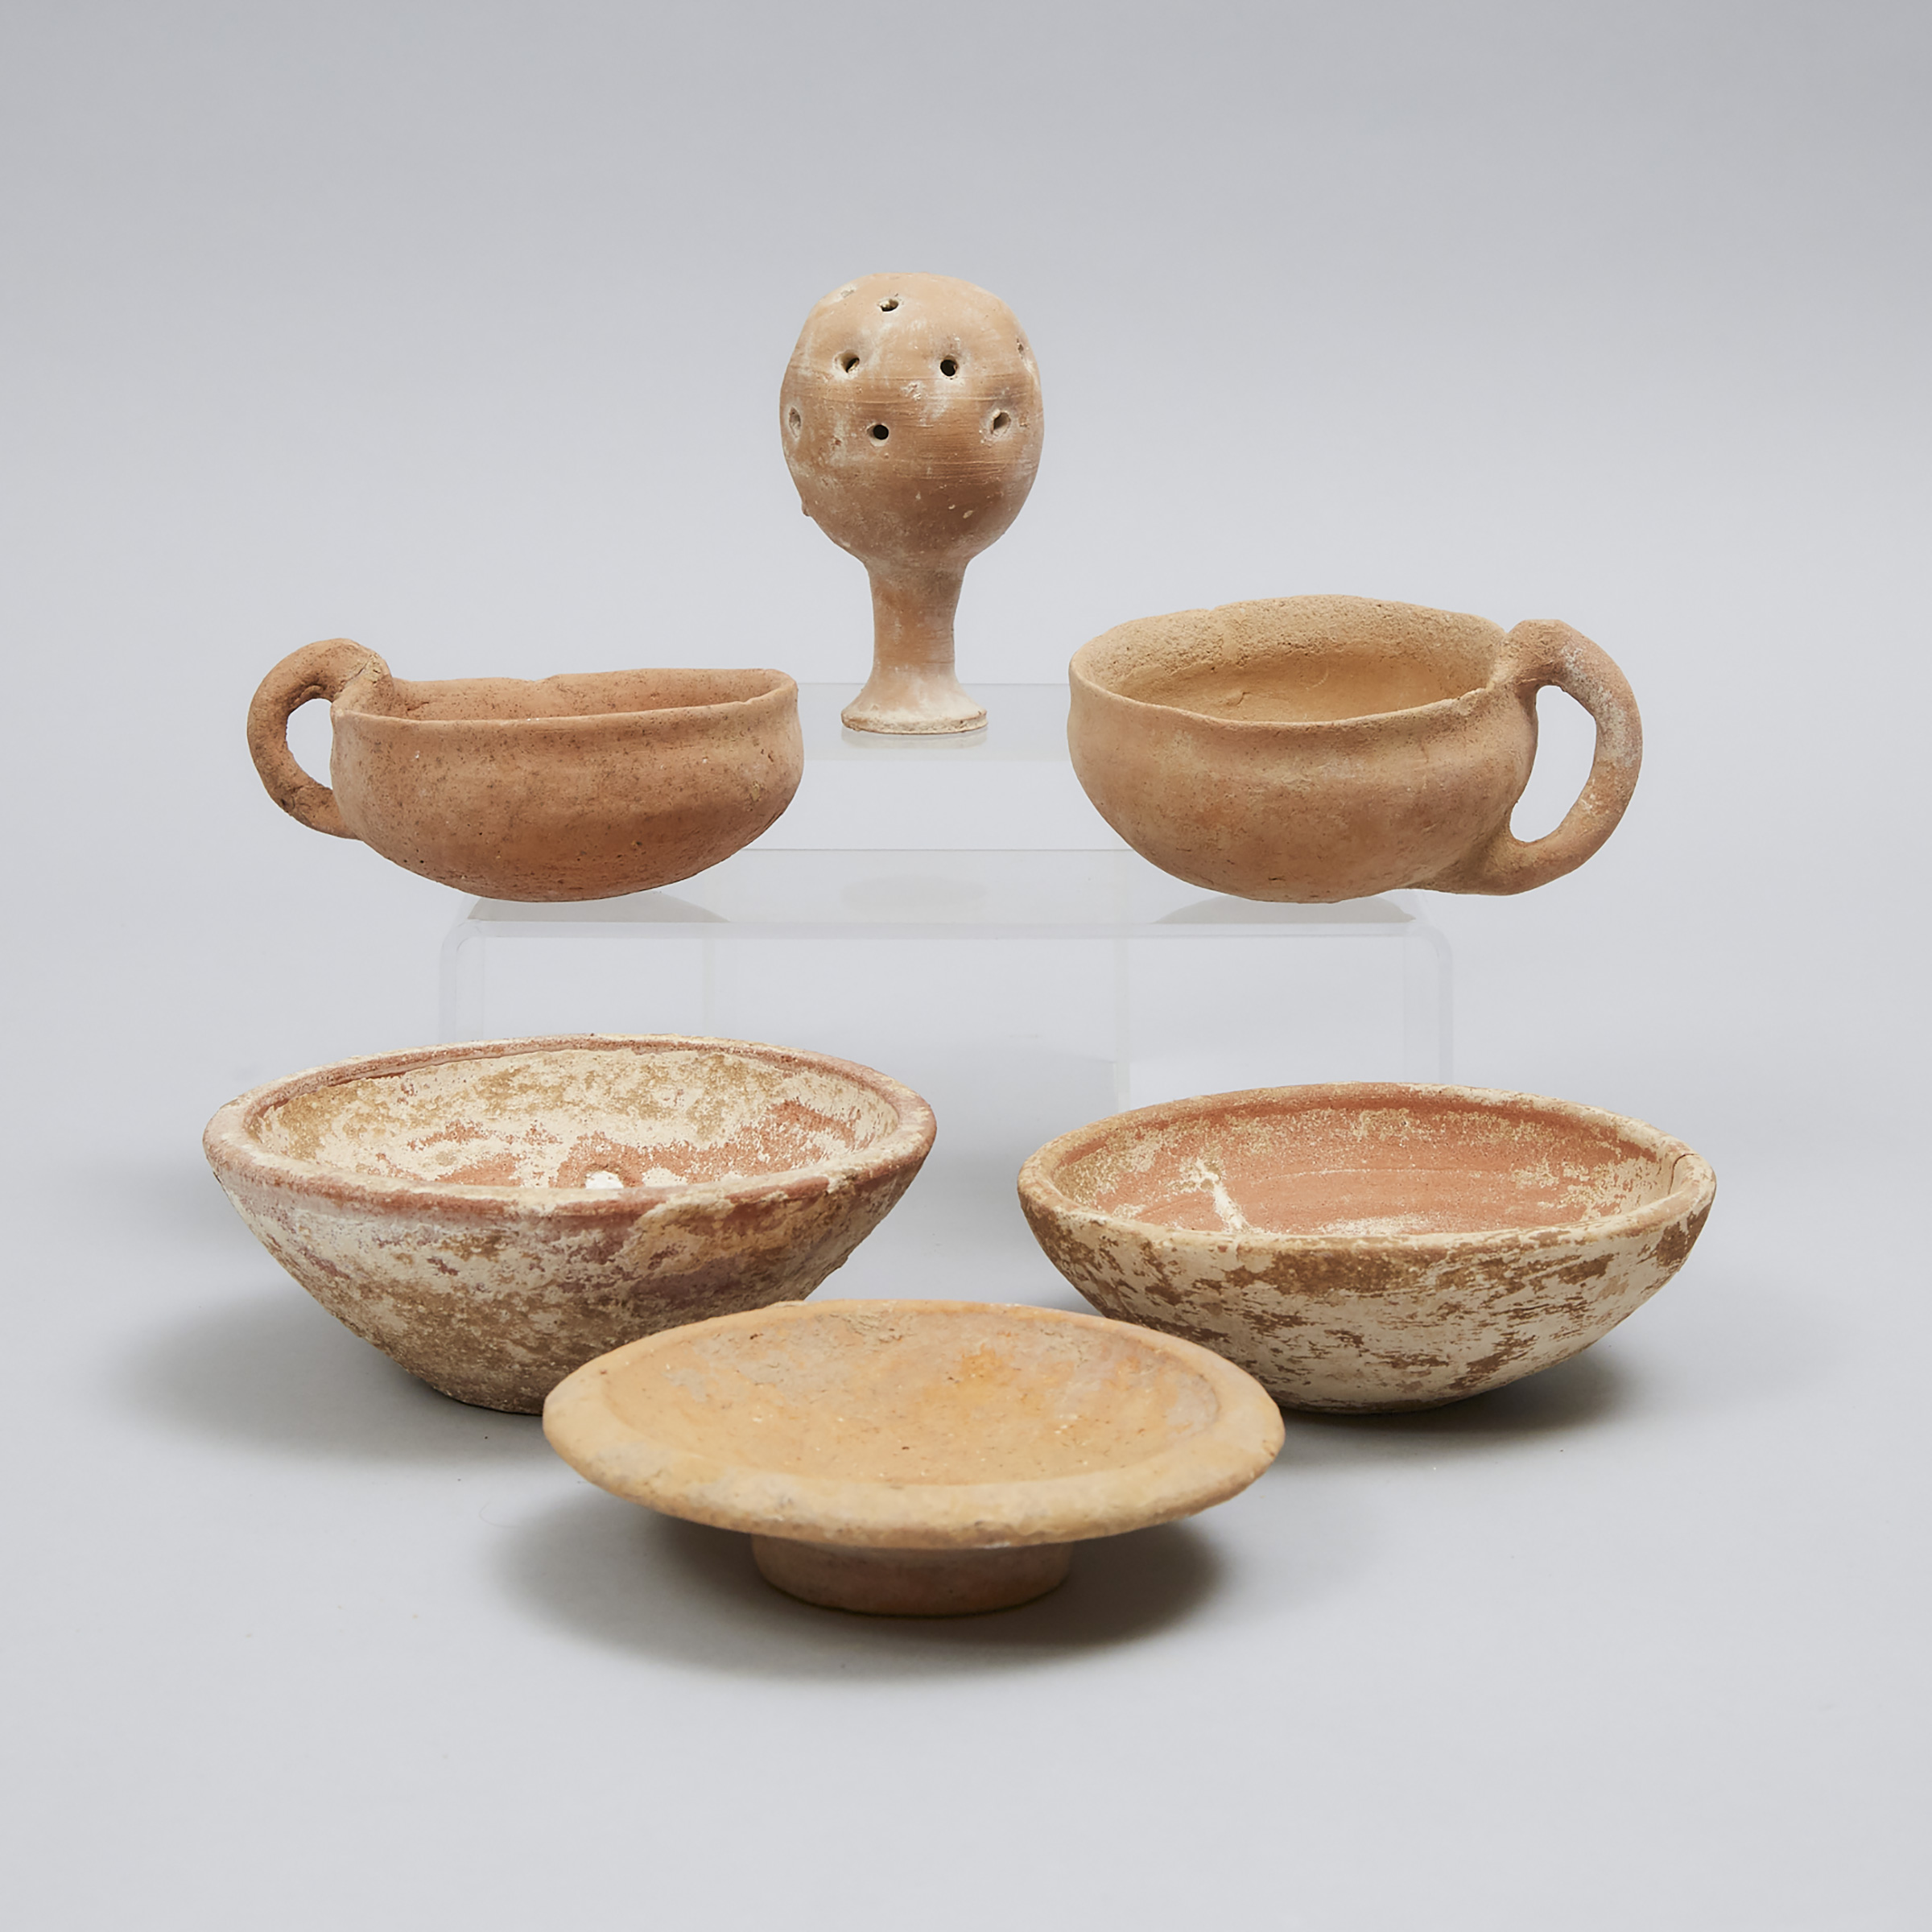 Two Levantine-Holy Land Pottery Bowls, Middle Bronze and Early Iron Ages, 2000-900 B.C.